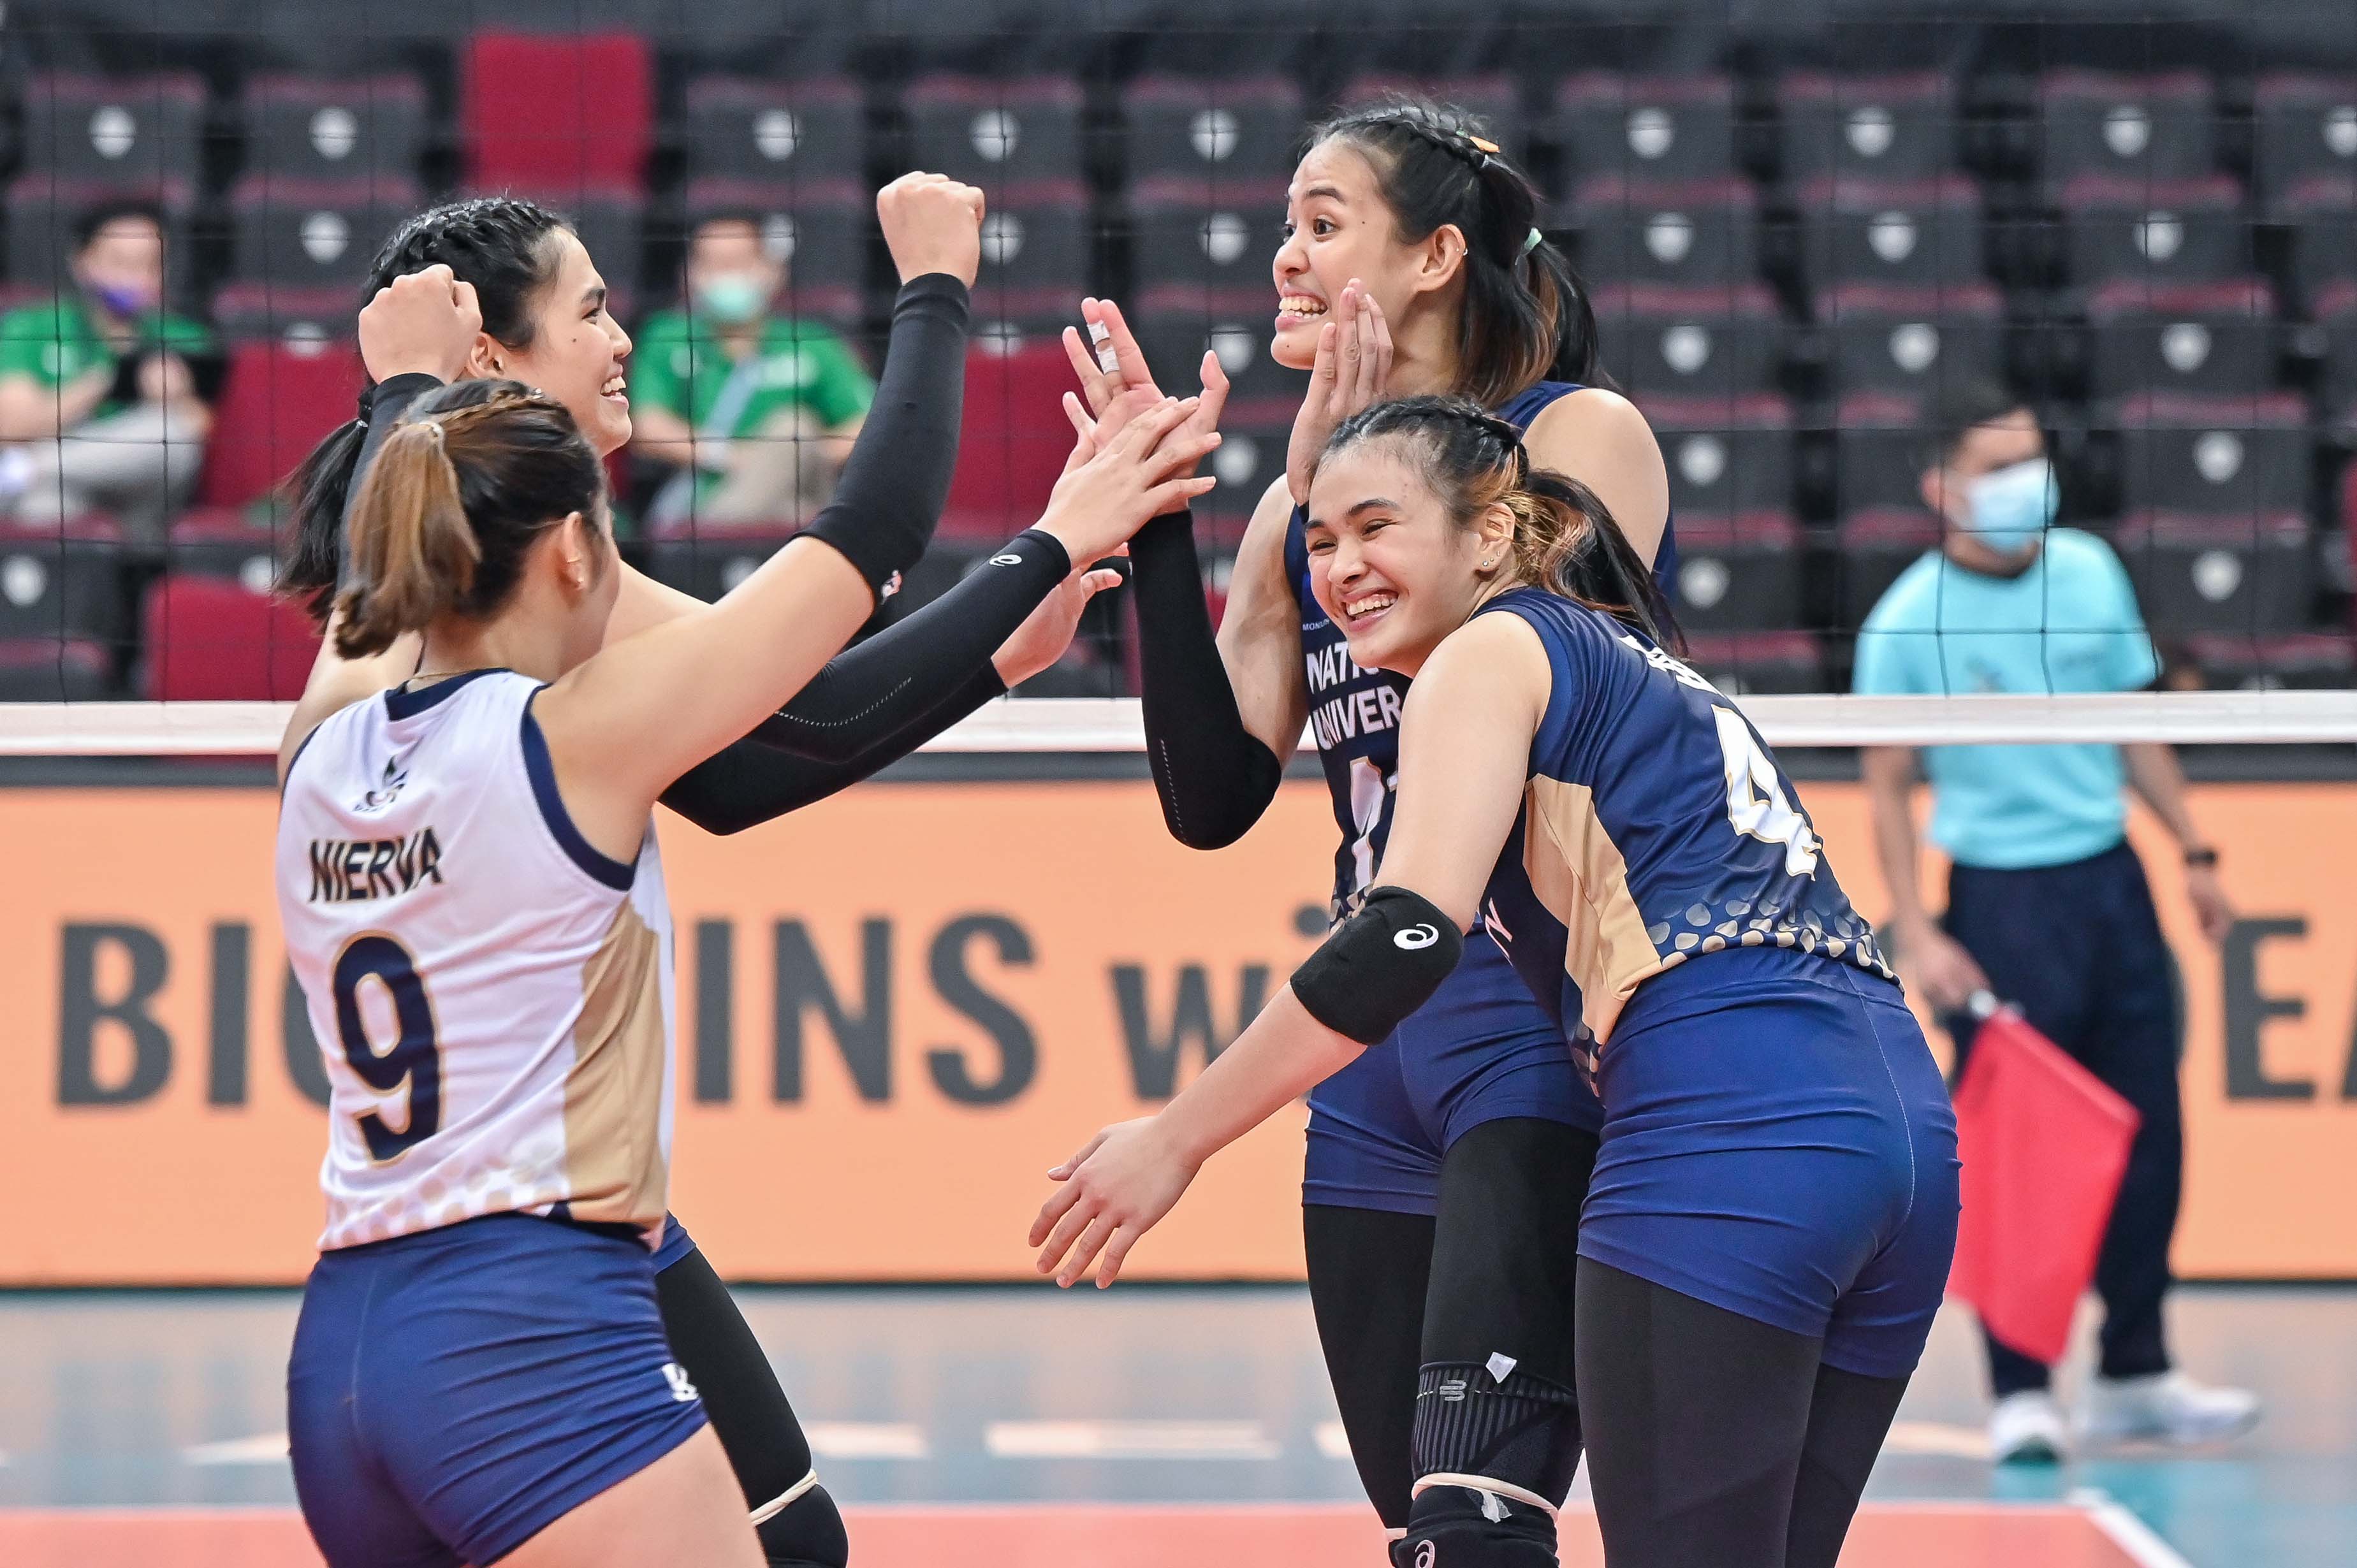 The NU Lady Bulldogs drew confidence in their work behind the scenes, as well as in their chemistry born from years of playing together. UAAP Media.